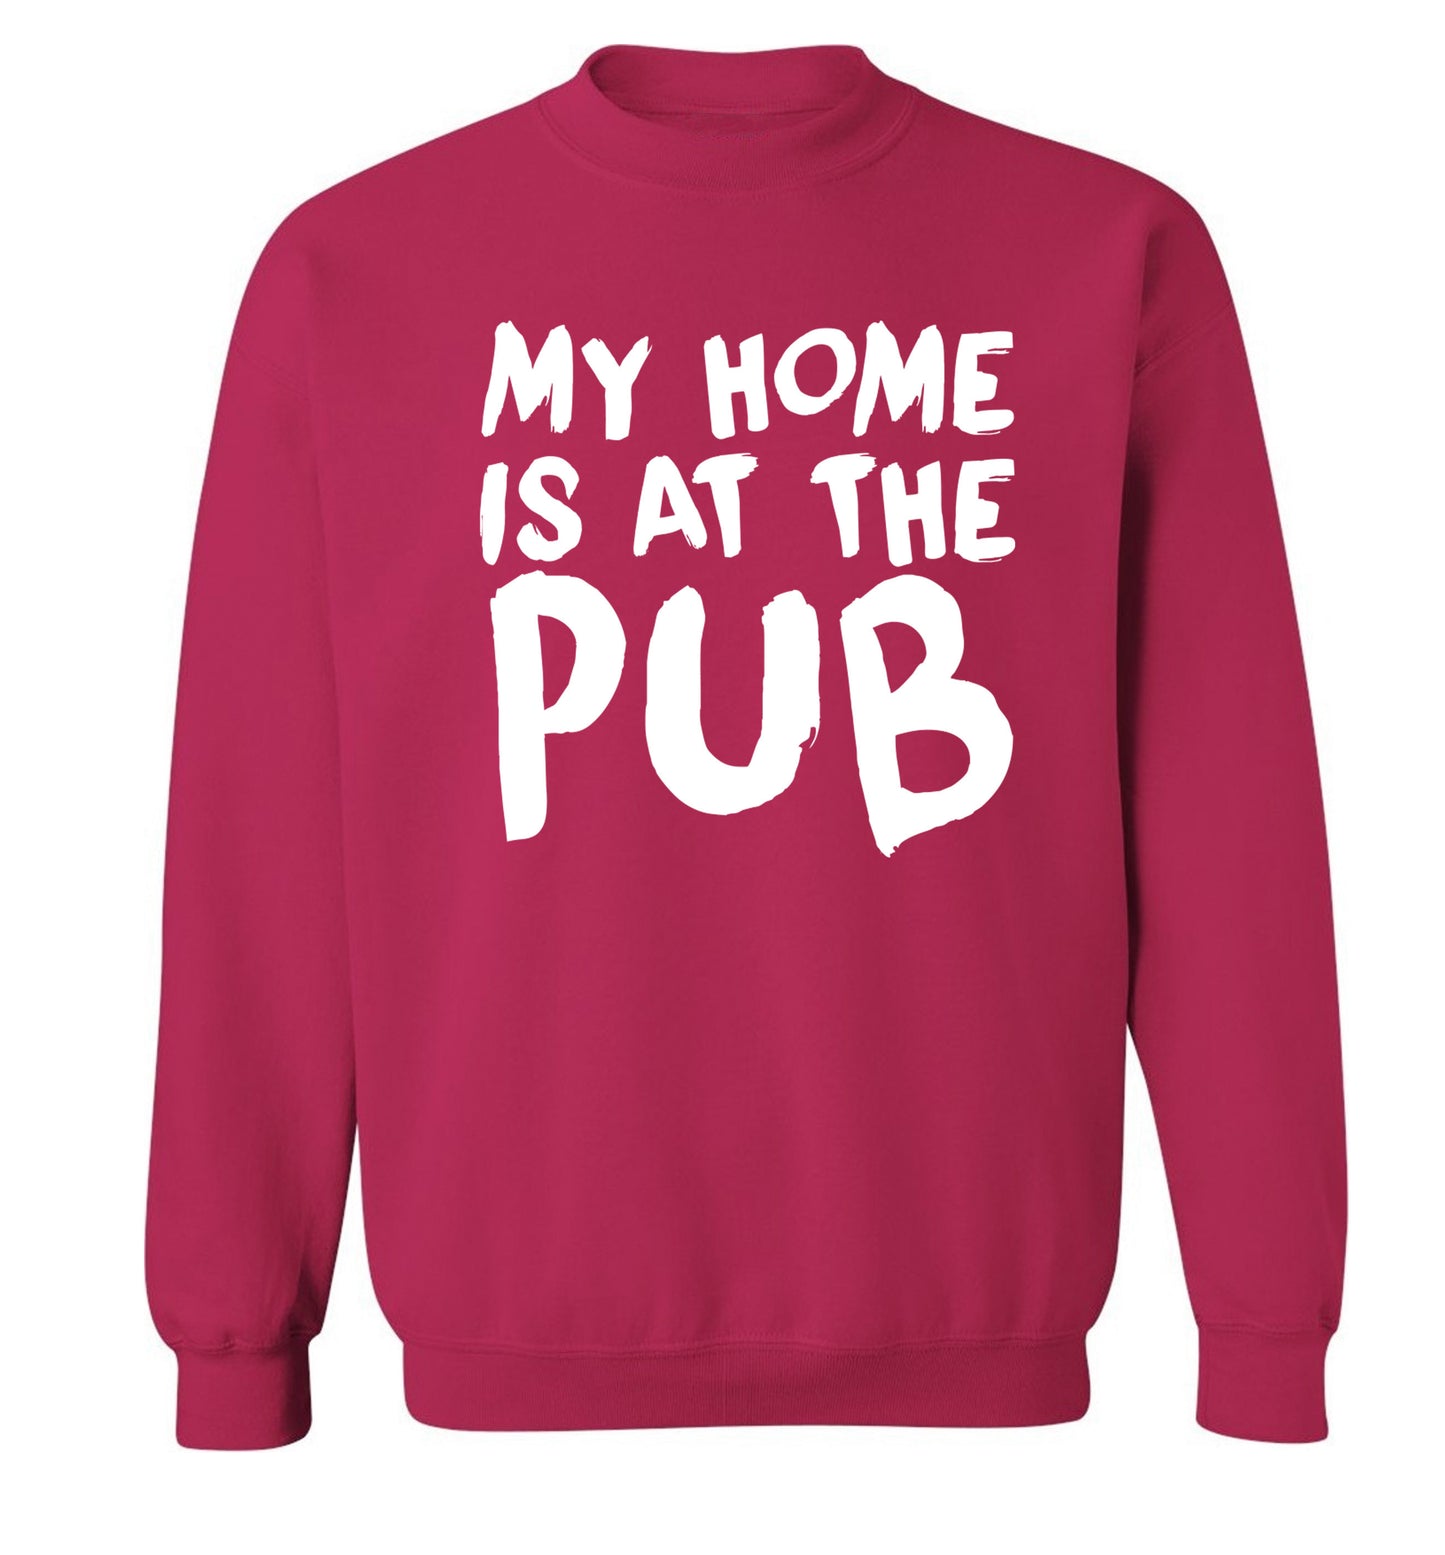 My home is at the pub Adult's unisex pink Sweater 2XL